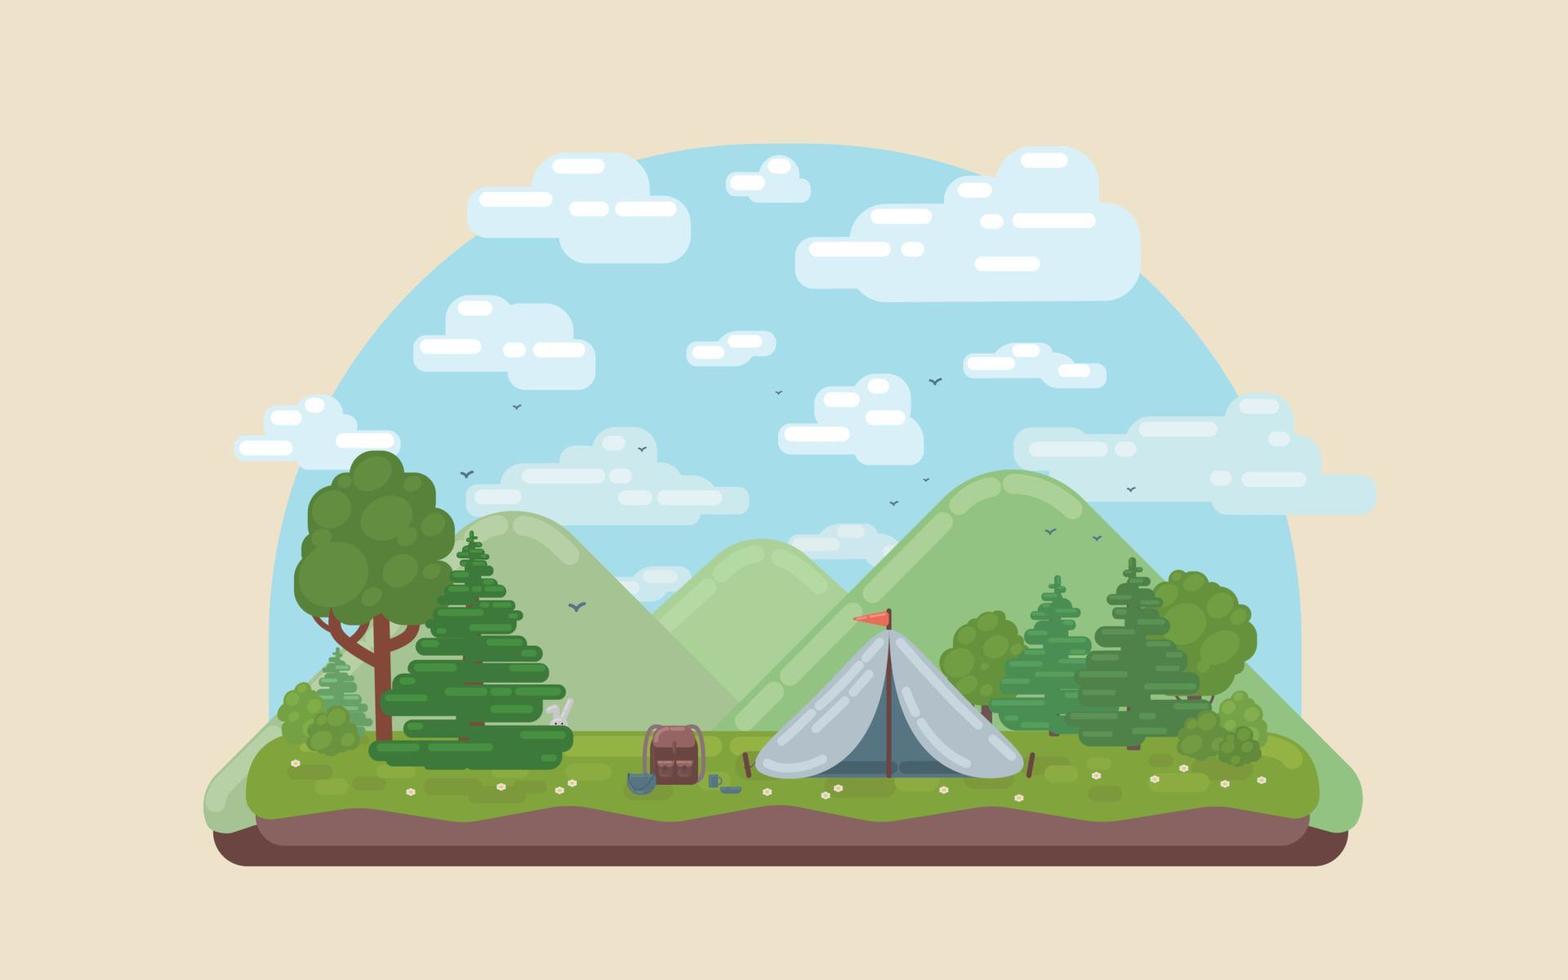 Landscape with forest campsite against mountains in background. vector